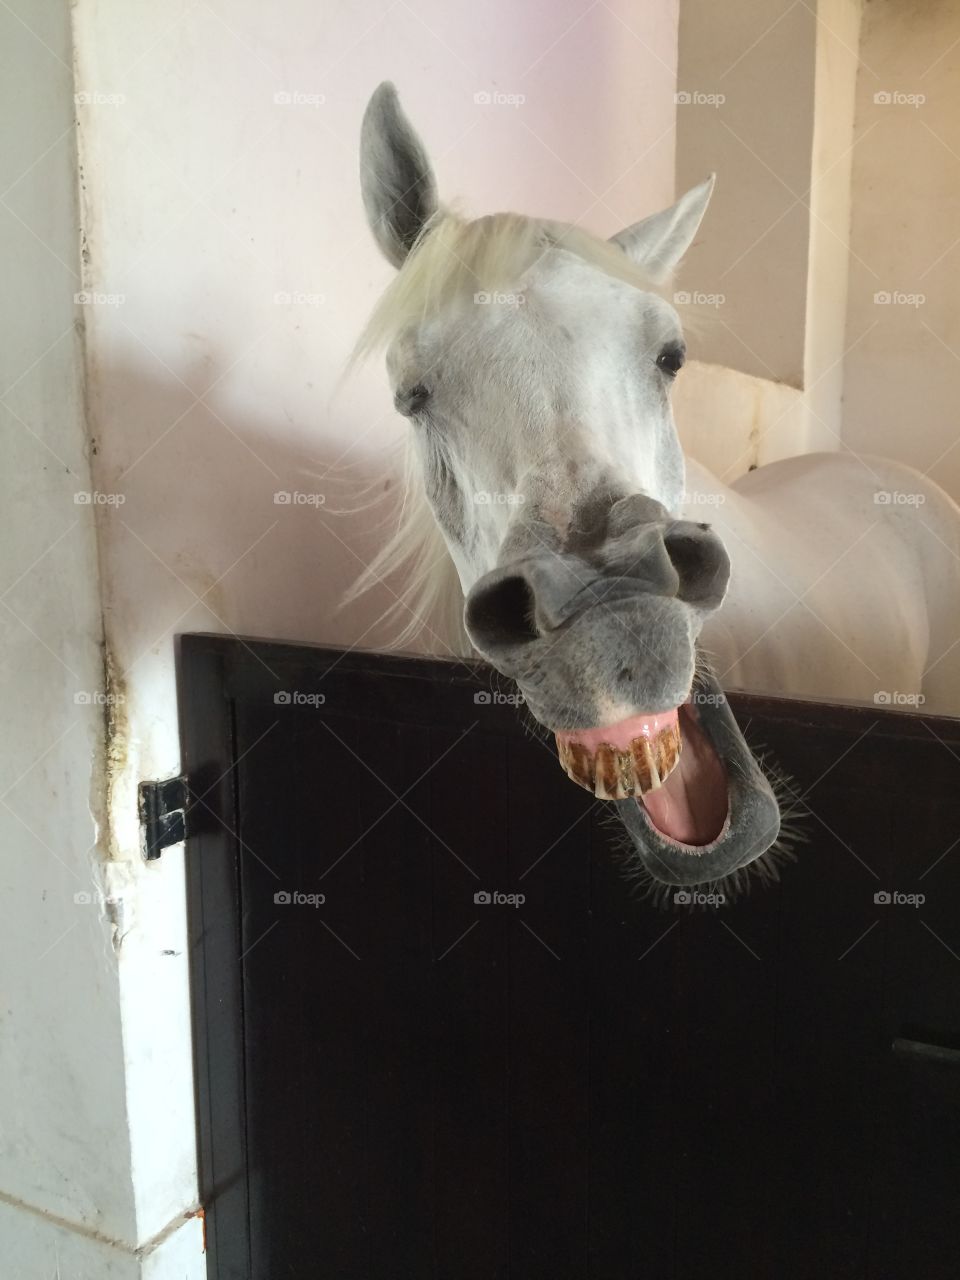 Stables in Doha, Qatar. A laughing horse! 